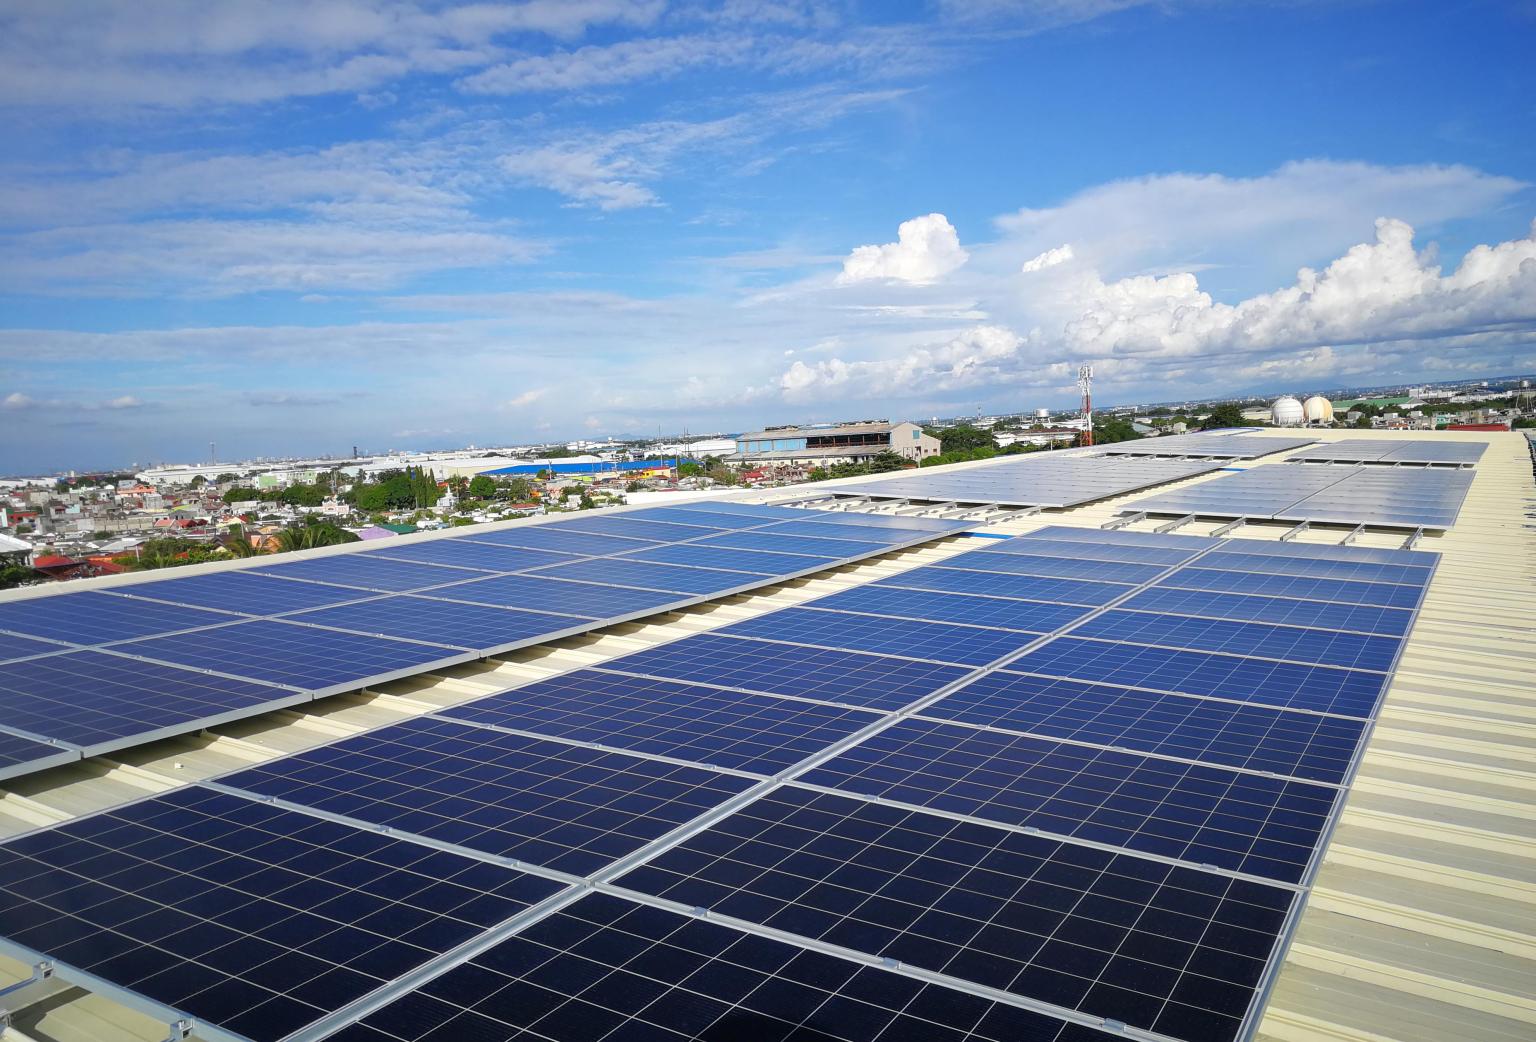 100kw solar roof project in Manila Philippines